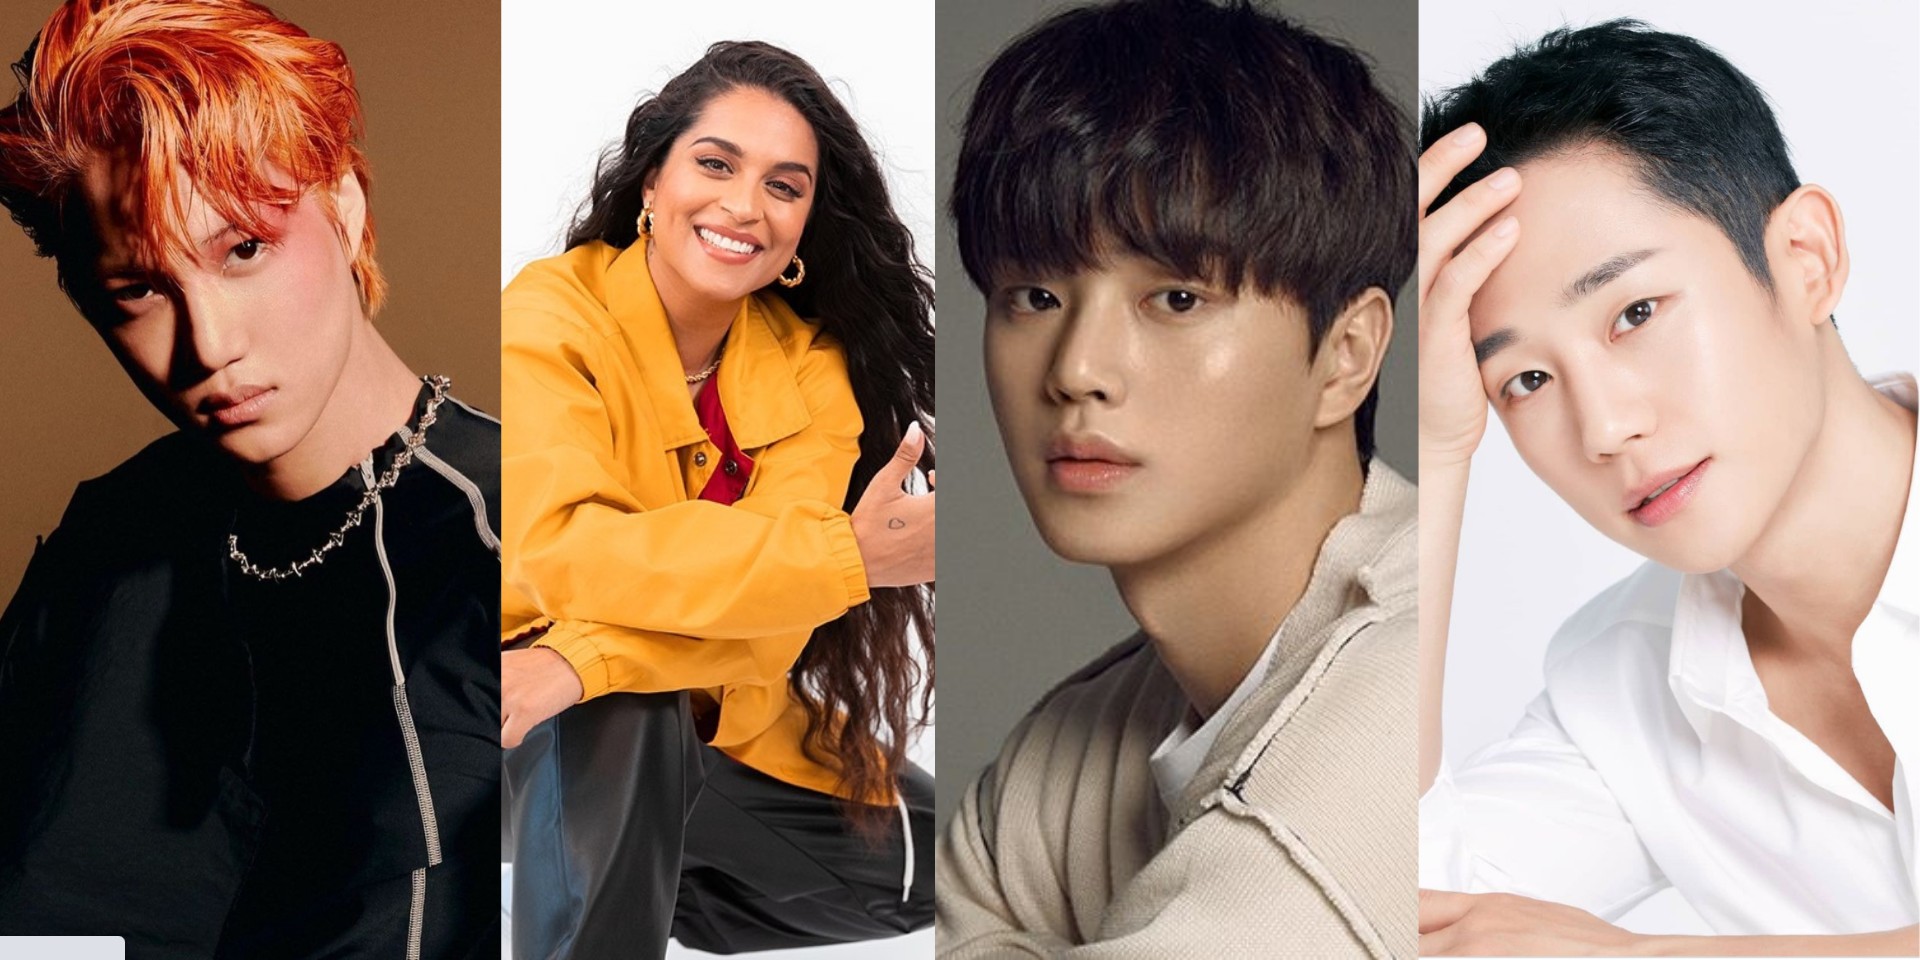 Netflix to hold global fan event 'TUDUM' featuring EXO's Kai, Song Kang, Jung Hae In, Lilly Singh and more